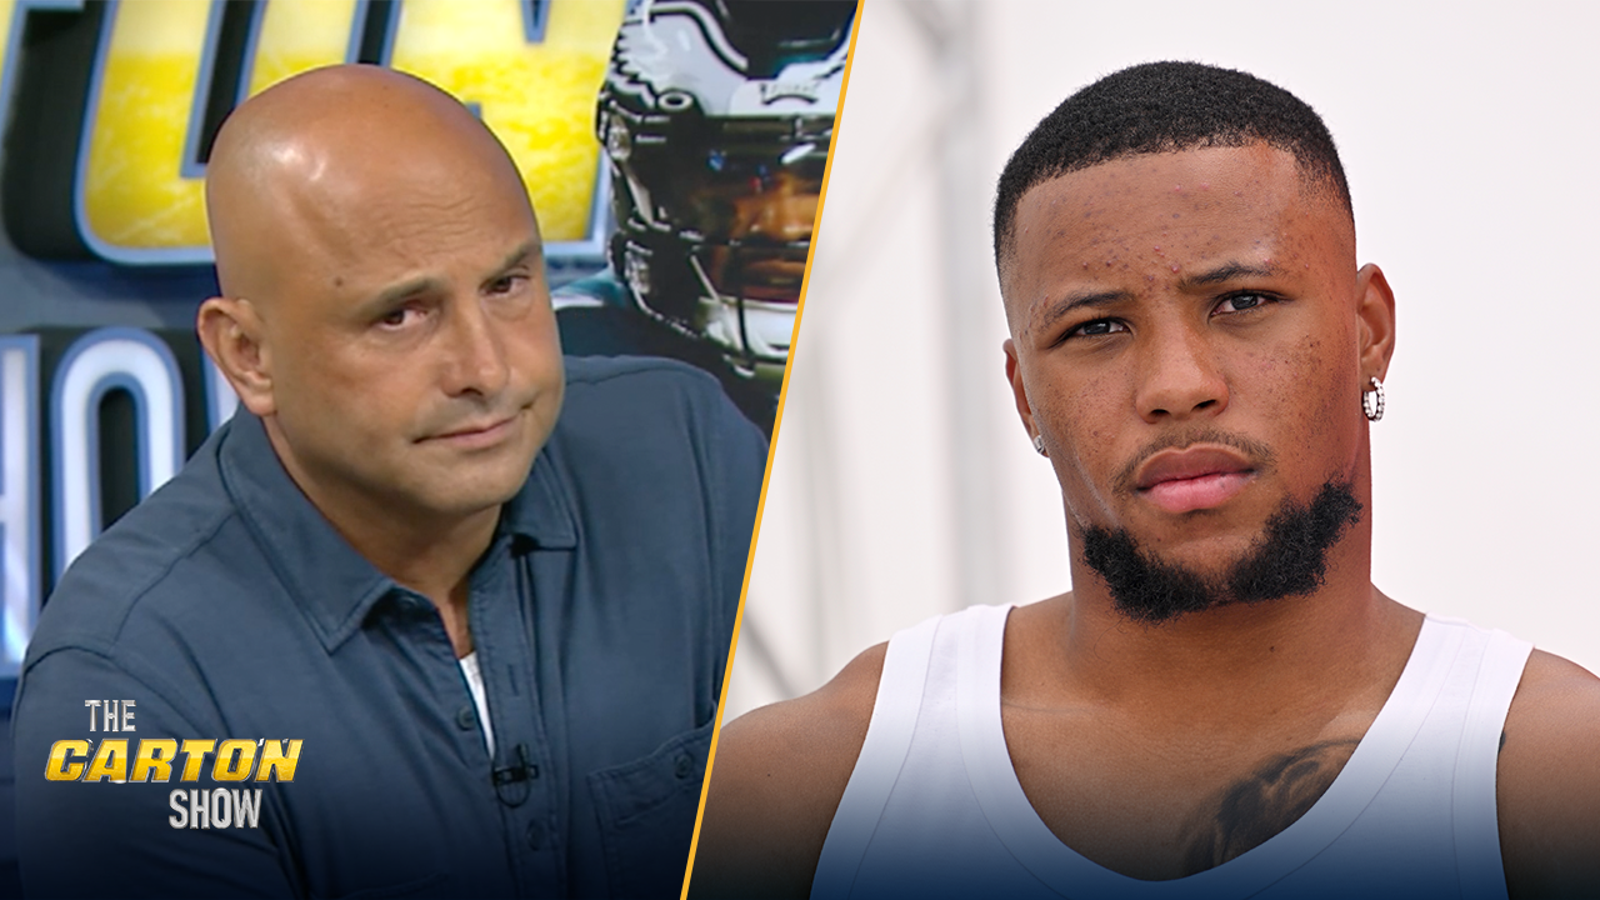 Craig Carton believes the Giants made a huge mistake not getting a deal done for Saquon Barkley before the deadline.